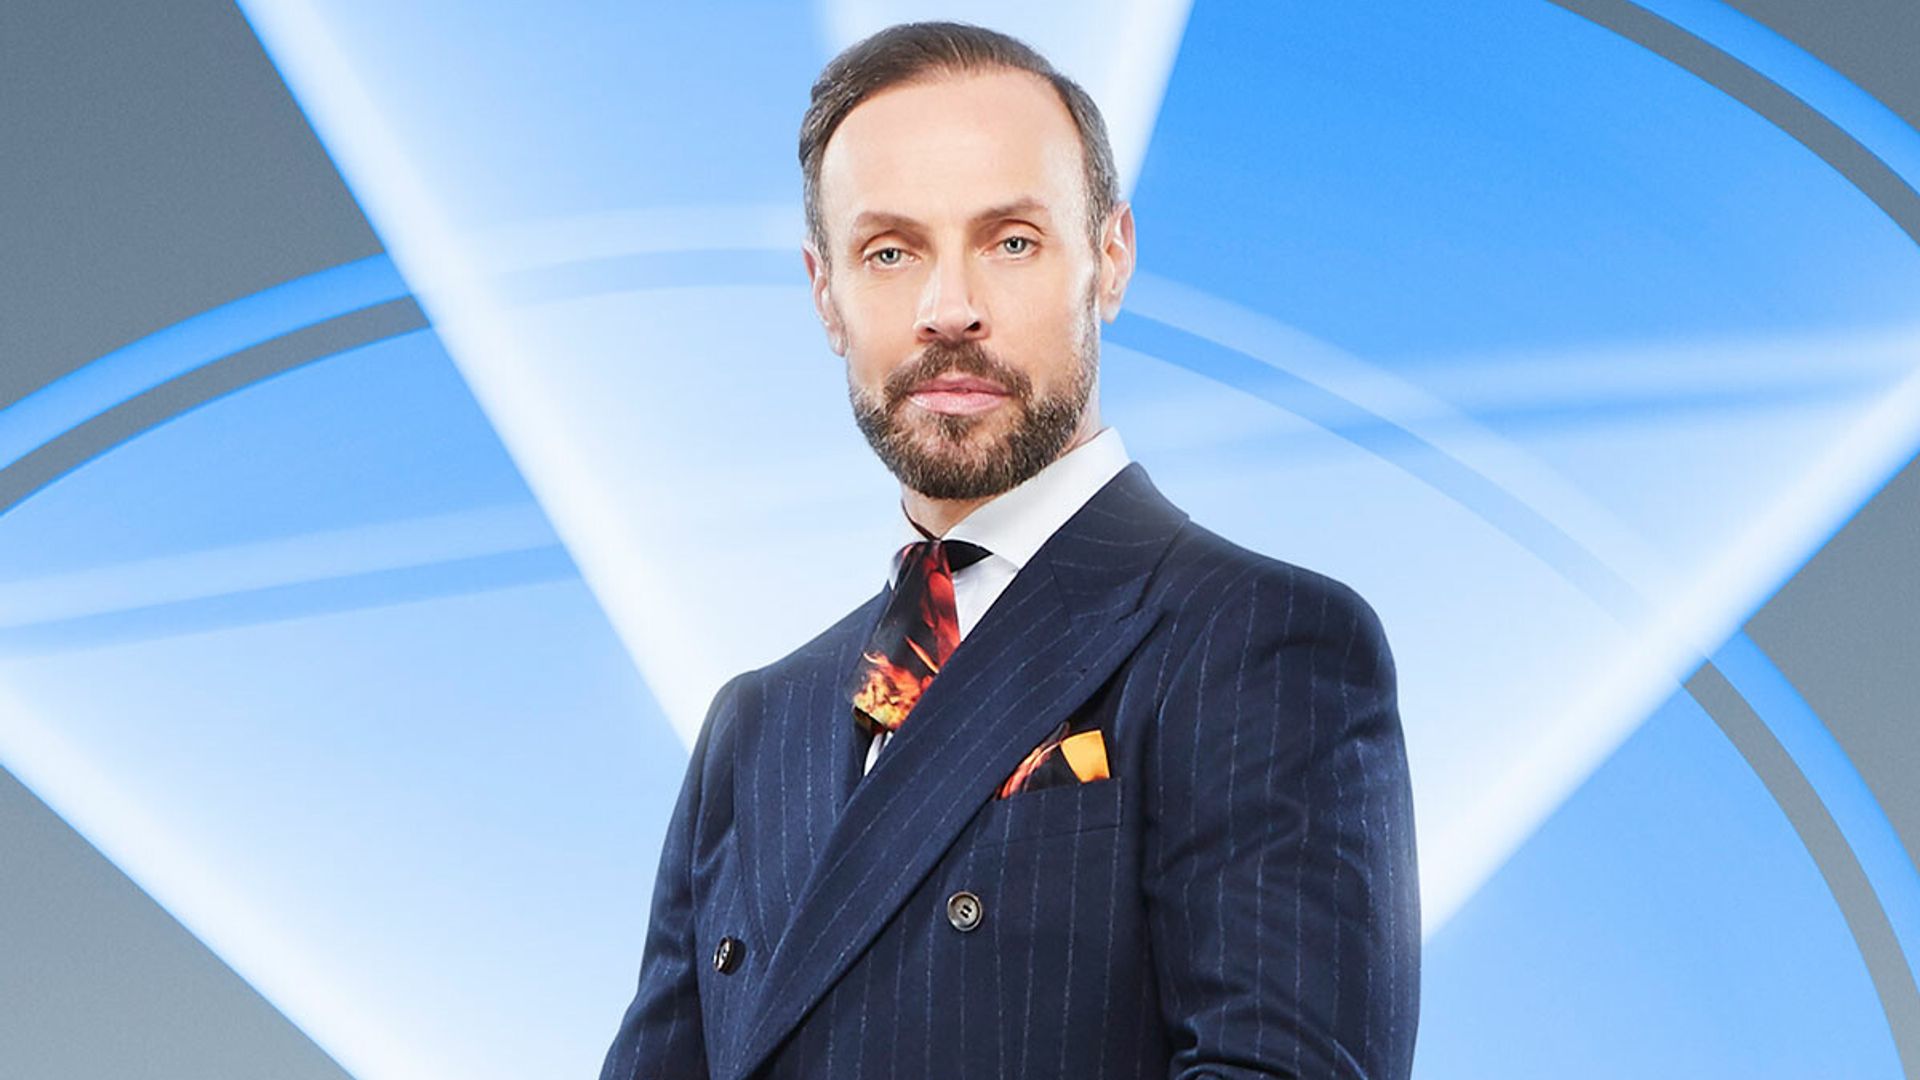 Jason Gardiner left Dancing on Ice to live in a tent for 'three months' - details